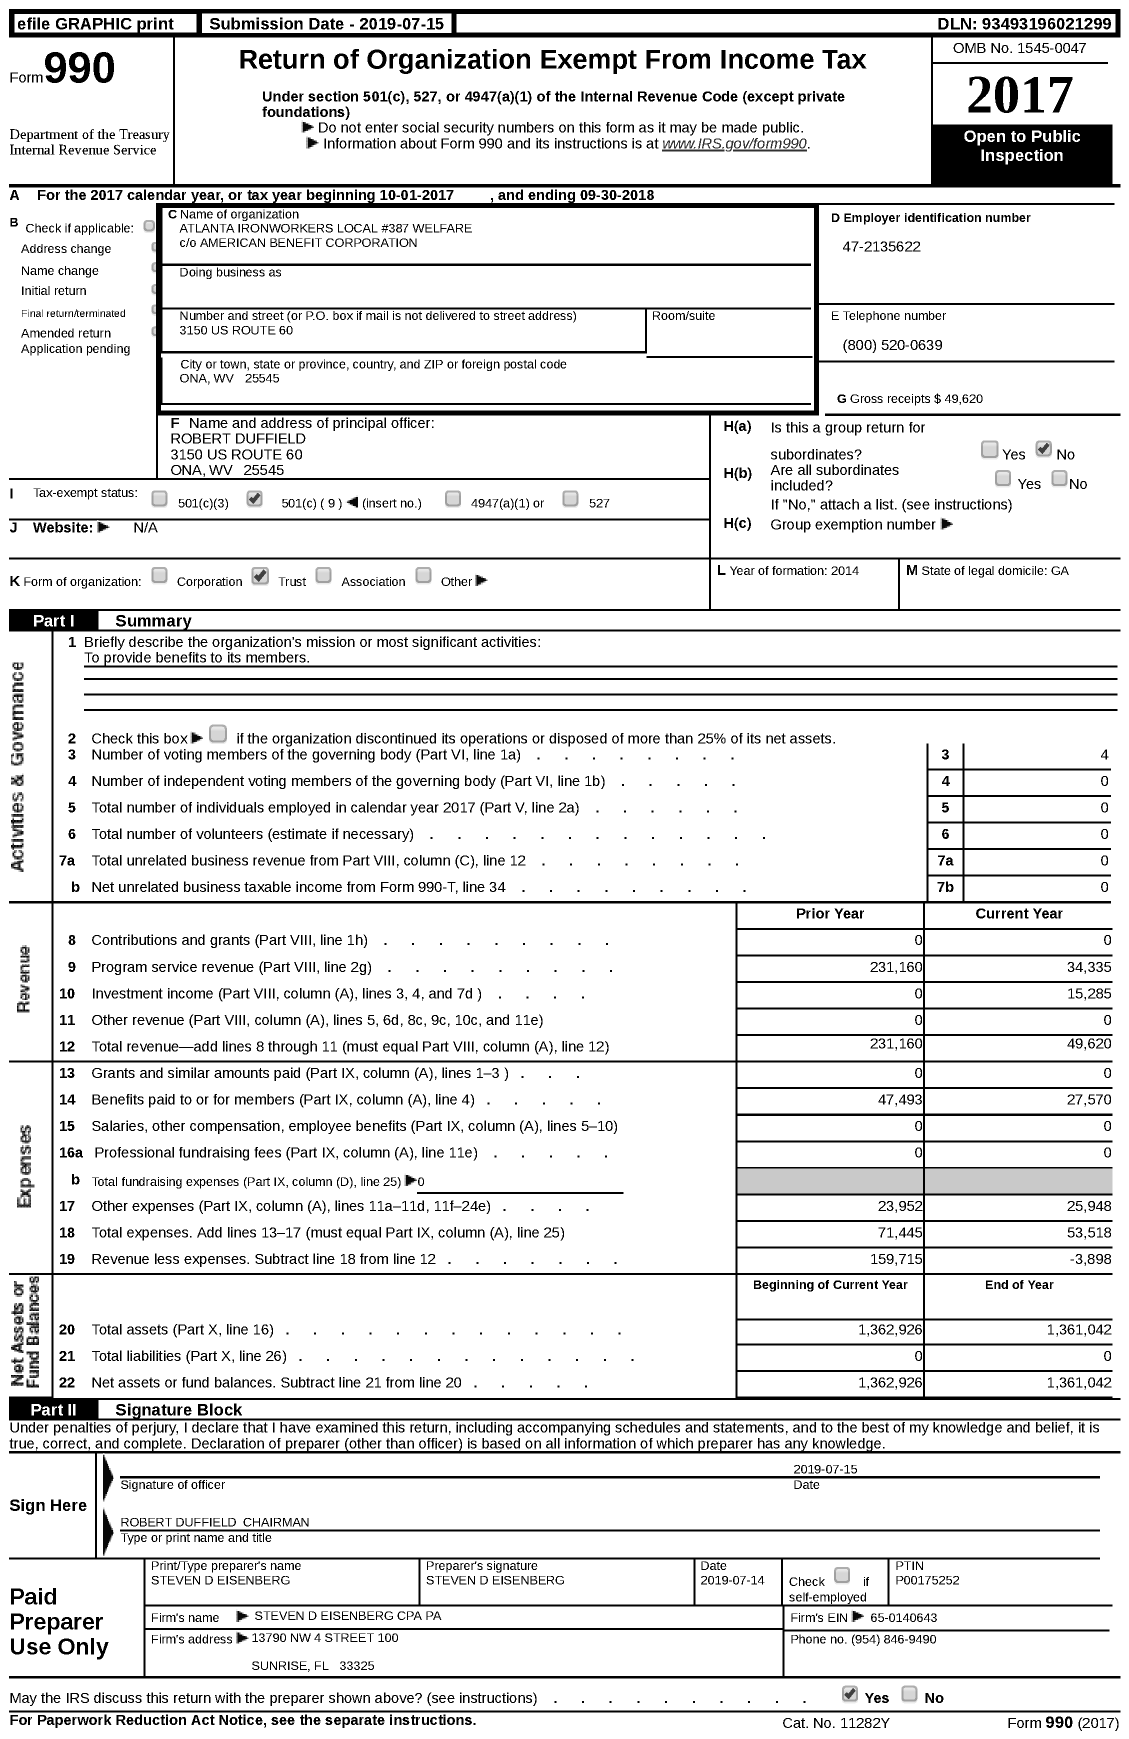 Image of first page of 2017 Form 990 for Atlanta Ironworkers Local #387 Welfare